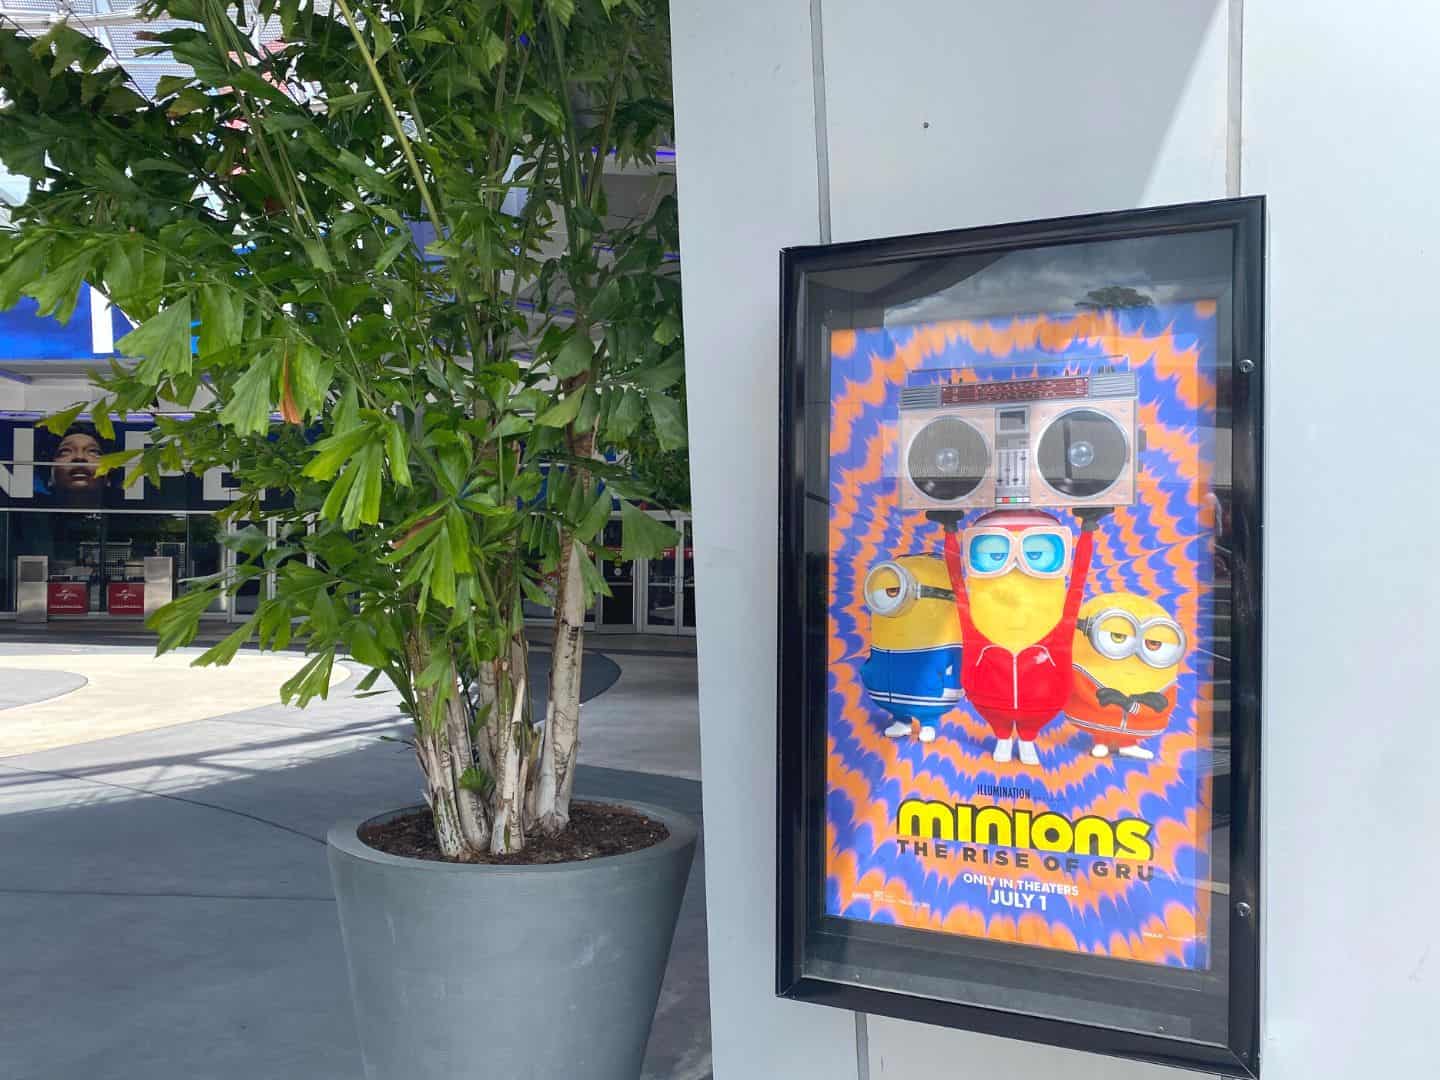 Minions The Rise of Gru Movie Poster at Universal Orlando CityWalk 